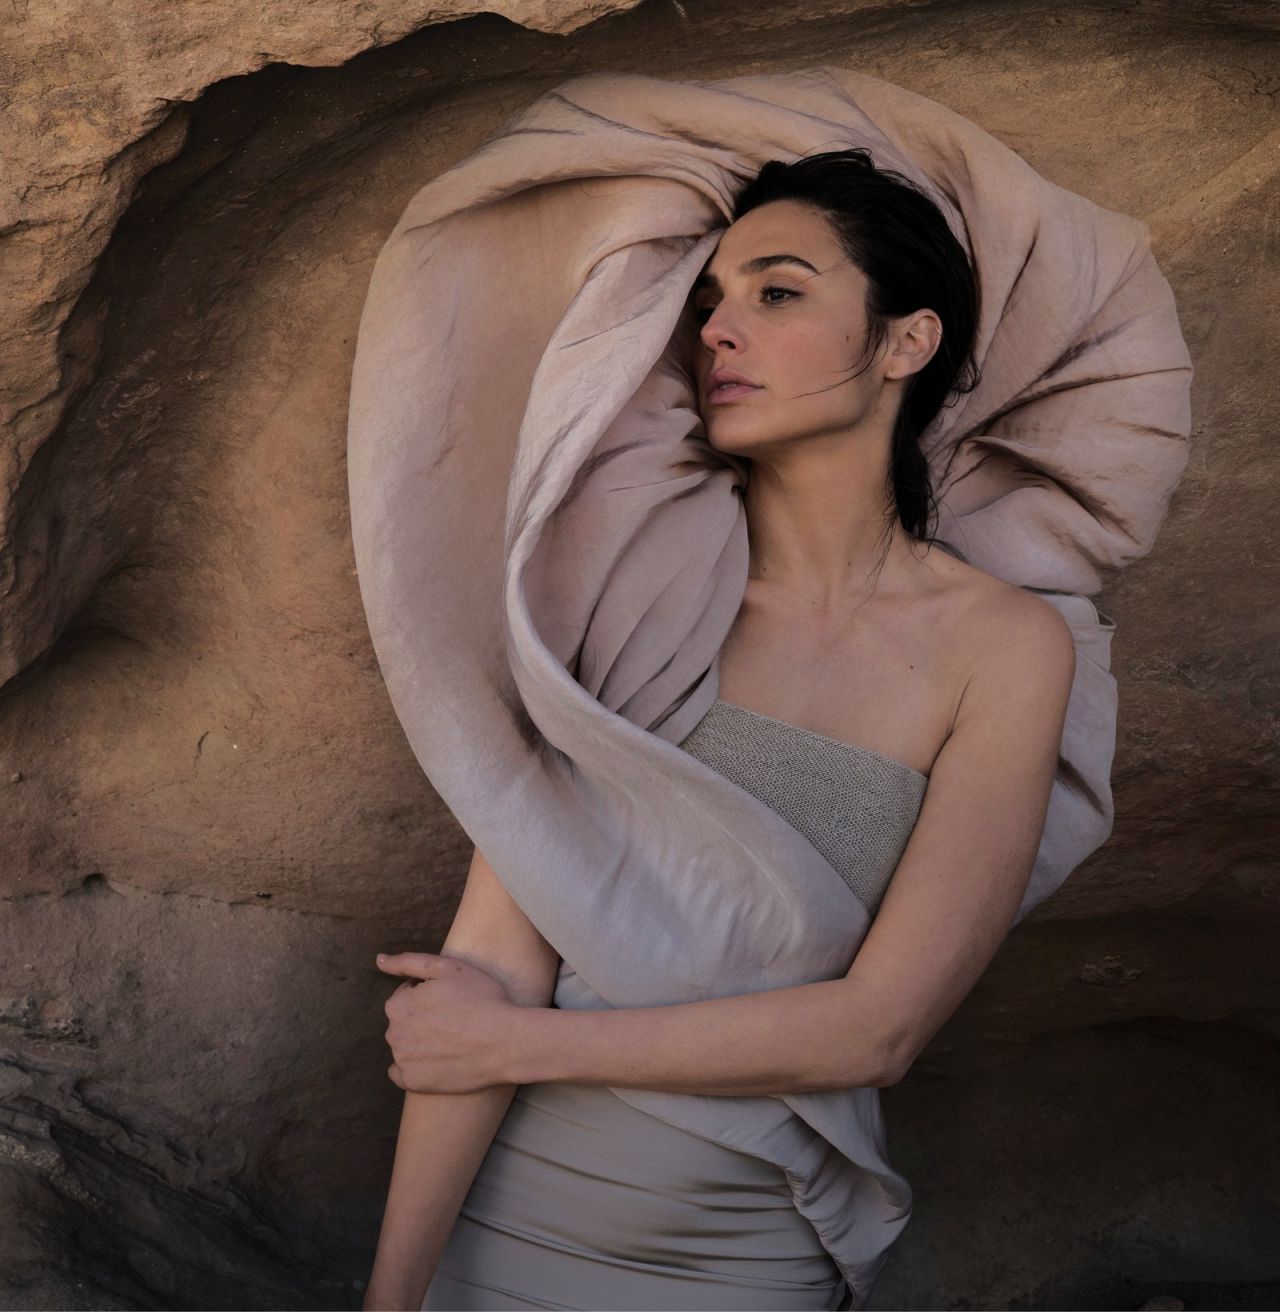 Gal Gadot for The Wrap Magazine Wallpapers